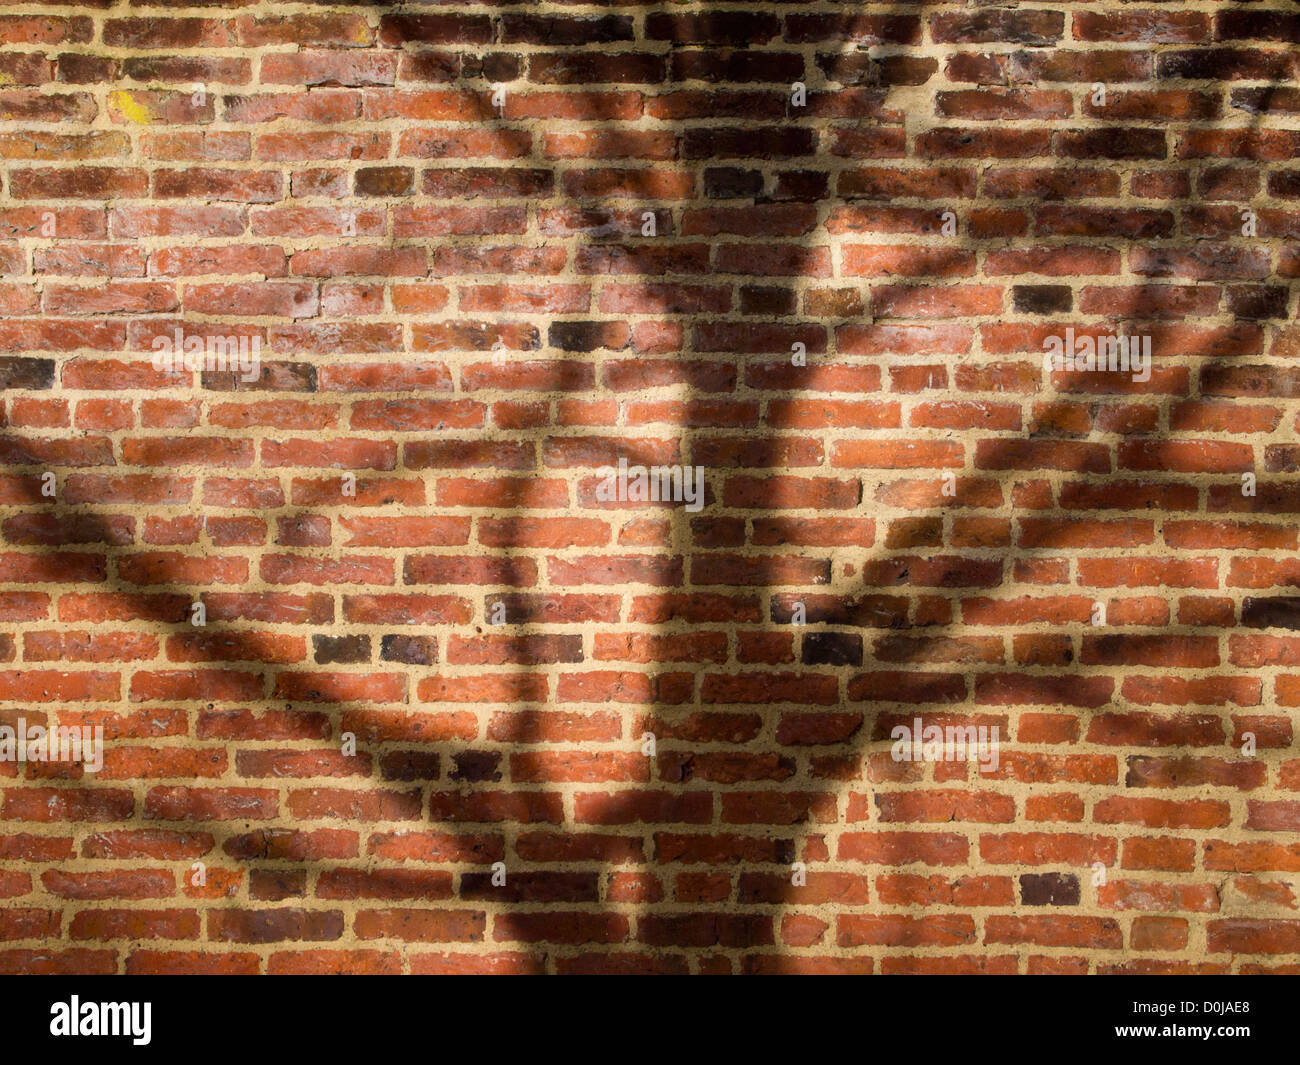 Shadow of a tree on the bricks of  the walled garden. Stock Photo